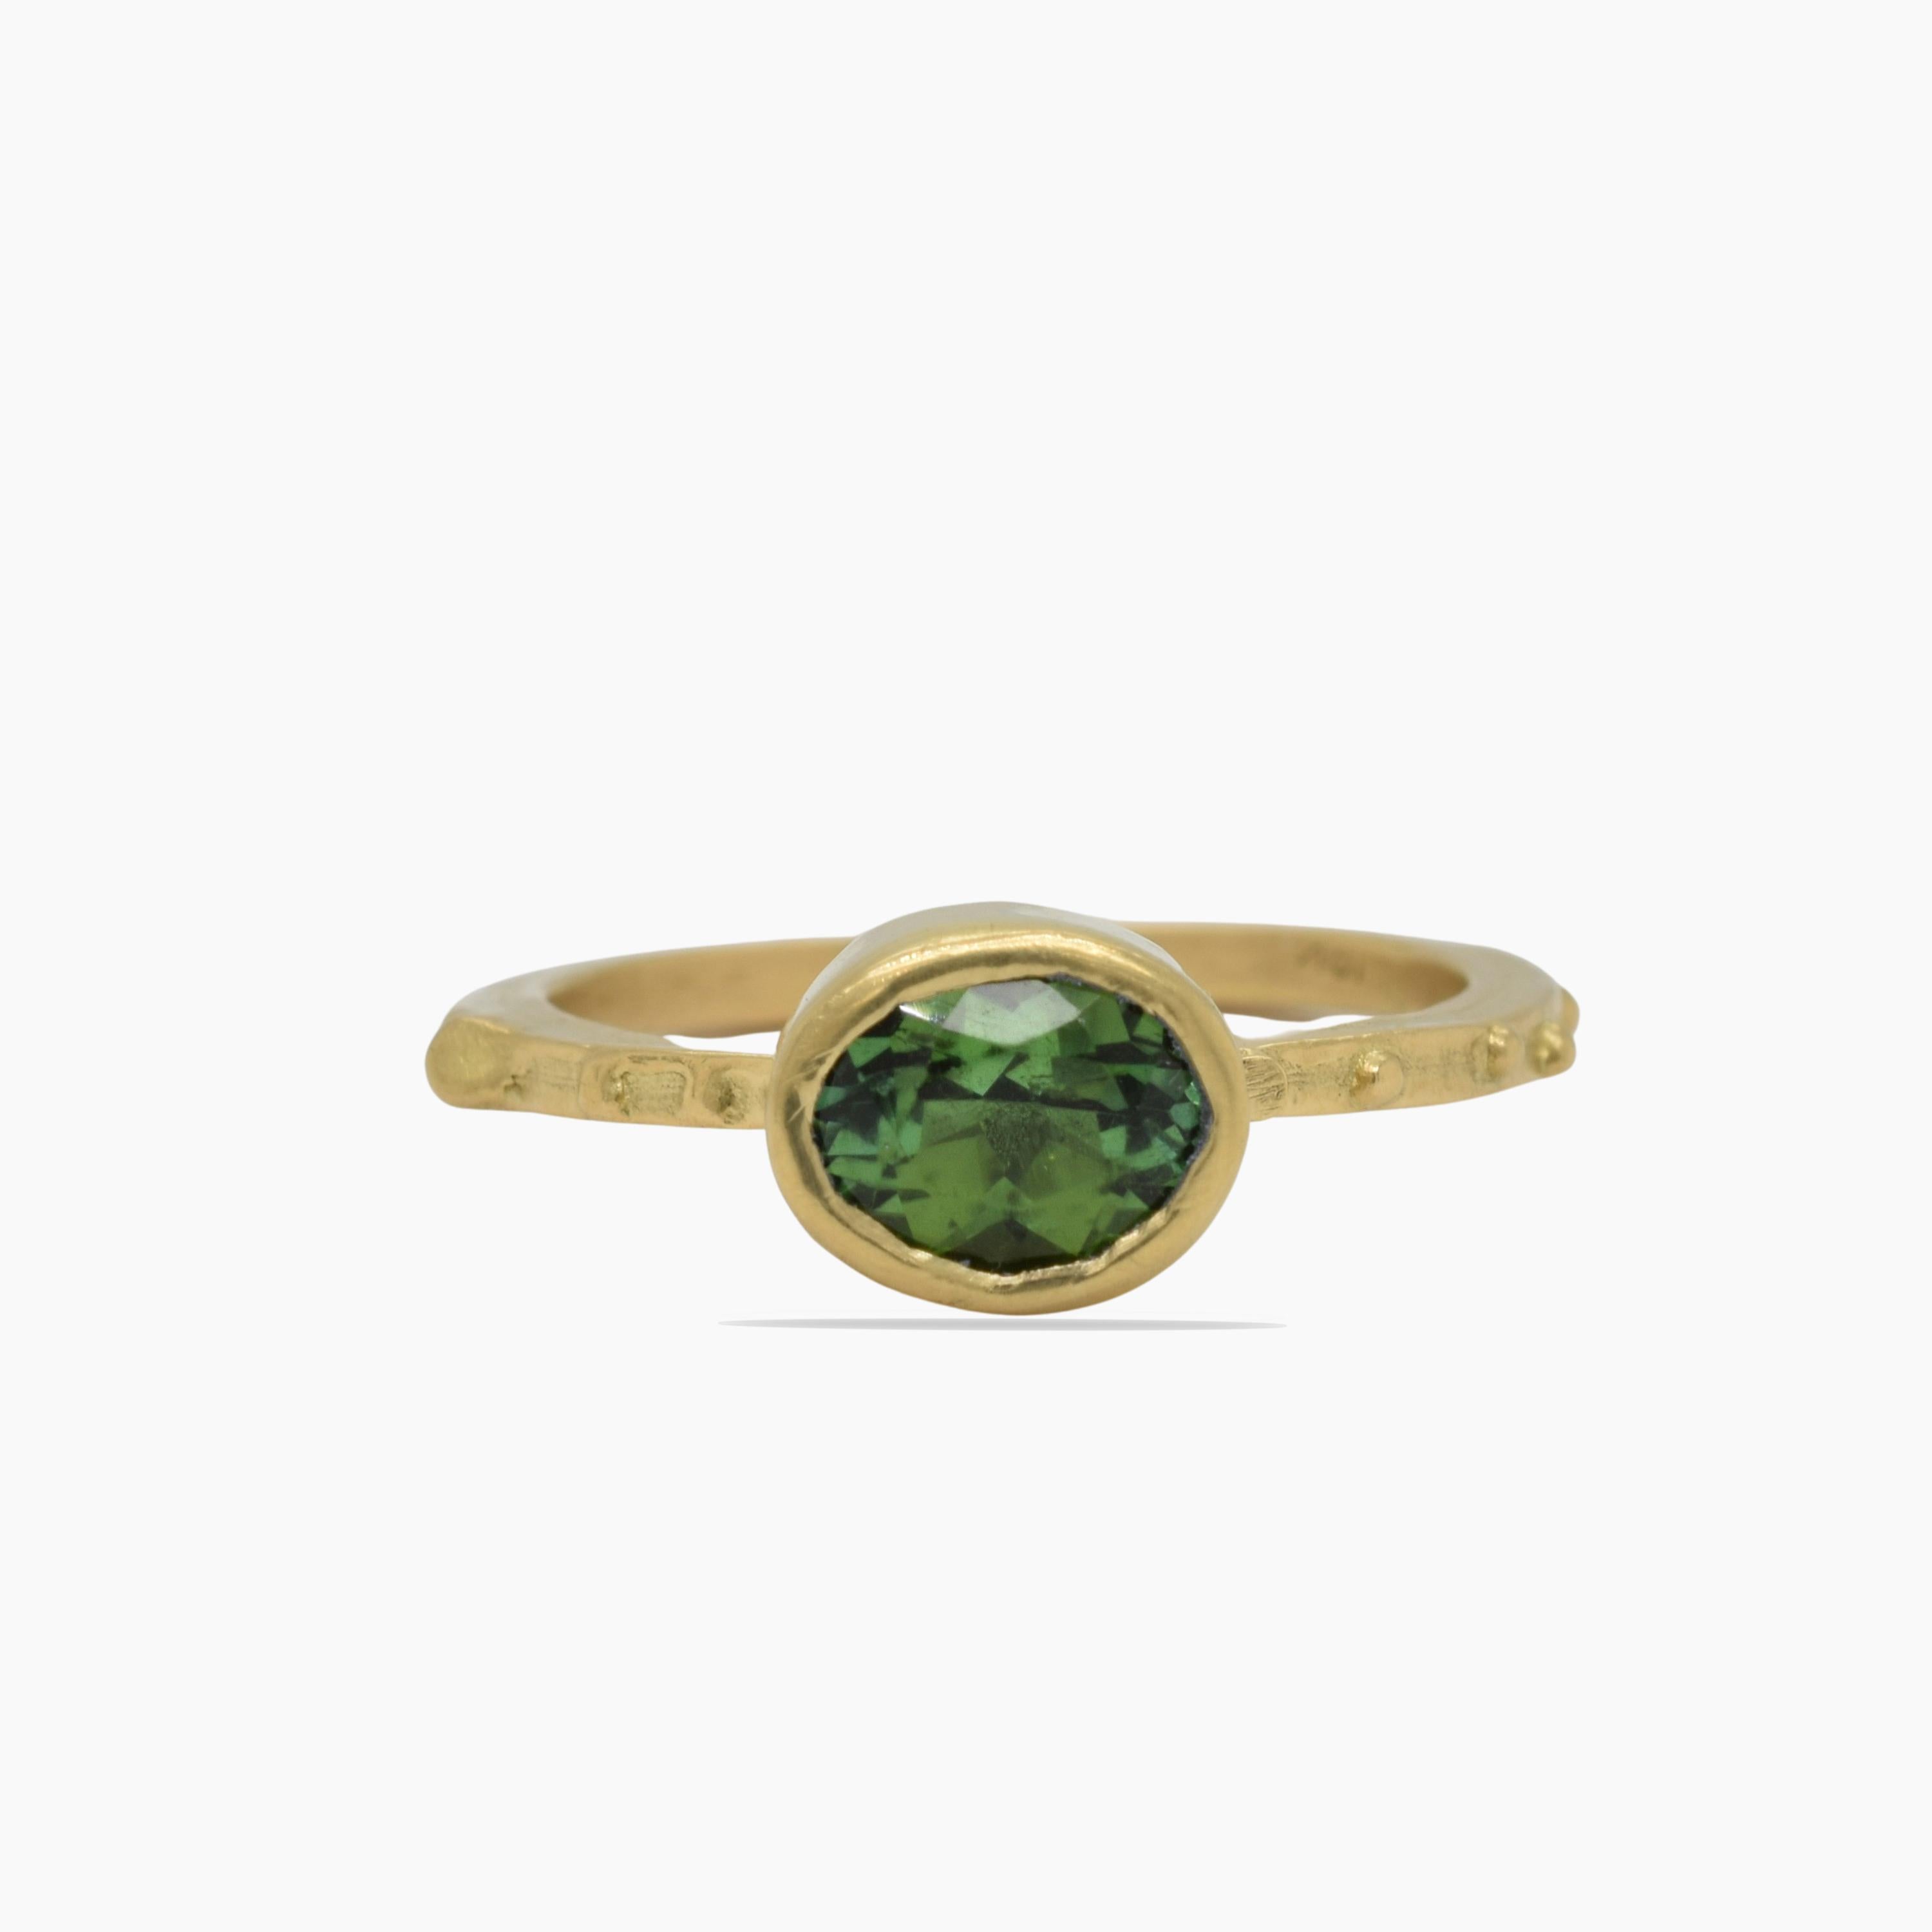 A pretty sweet 1.27 Carat Green Tourmaline is simply set in this 18K bezel and 18K grainy stacking band.  Hand fabricated and one of a kind.  Stacks well with my other Lorelei rings.

Size- 6-1/4